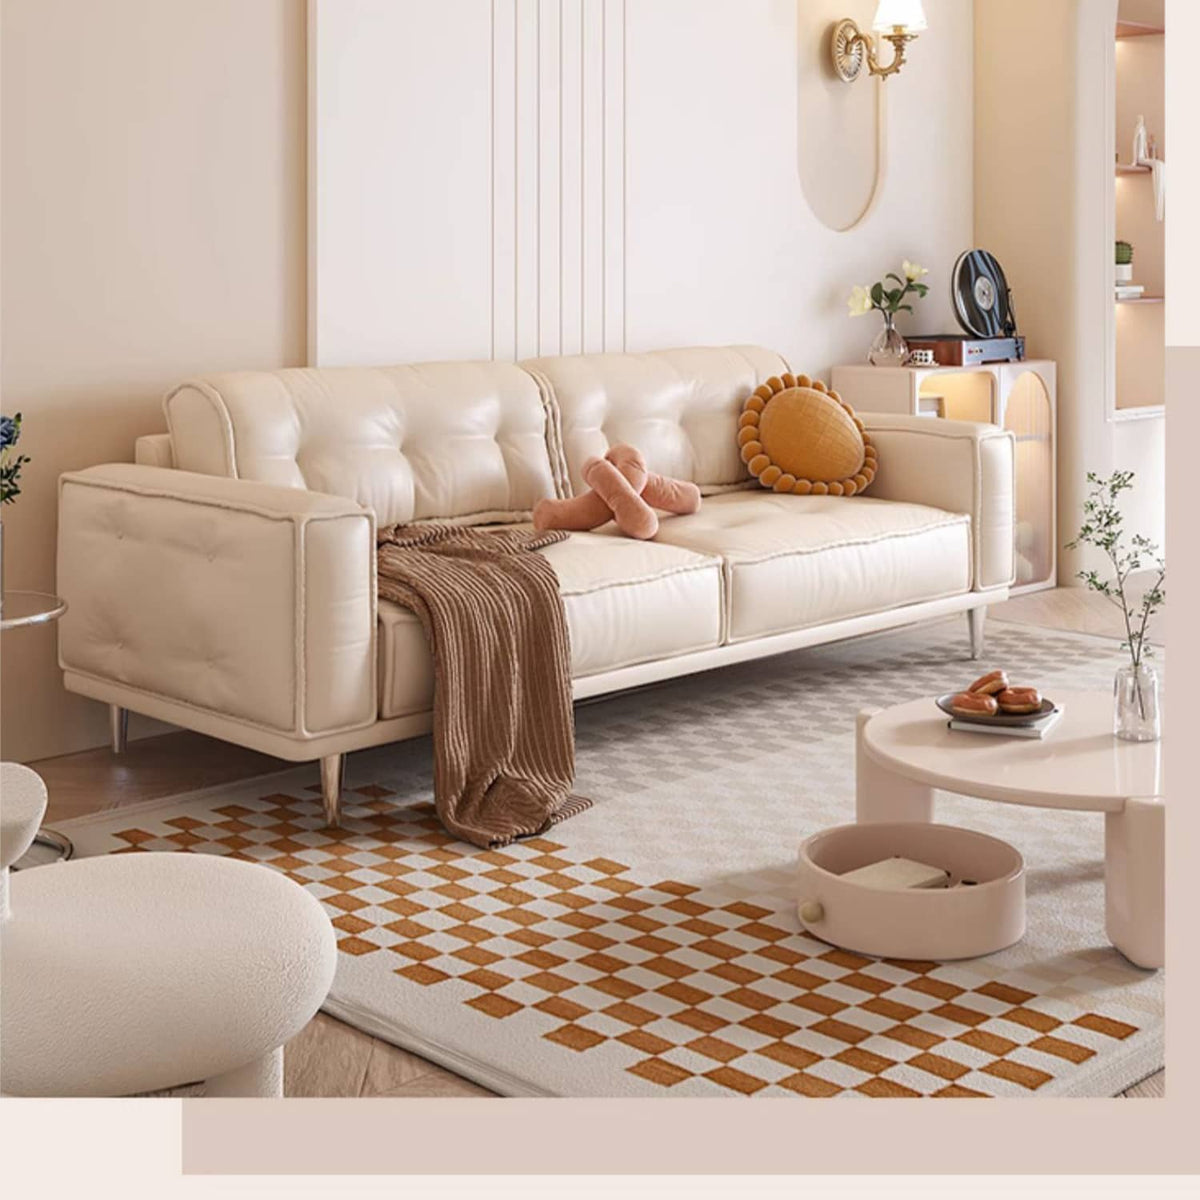 Beige Orange Sofa with Solid Wood Frame and Faux Leather Accents - Modern Design with Stainless Steel Legs fbby-1406